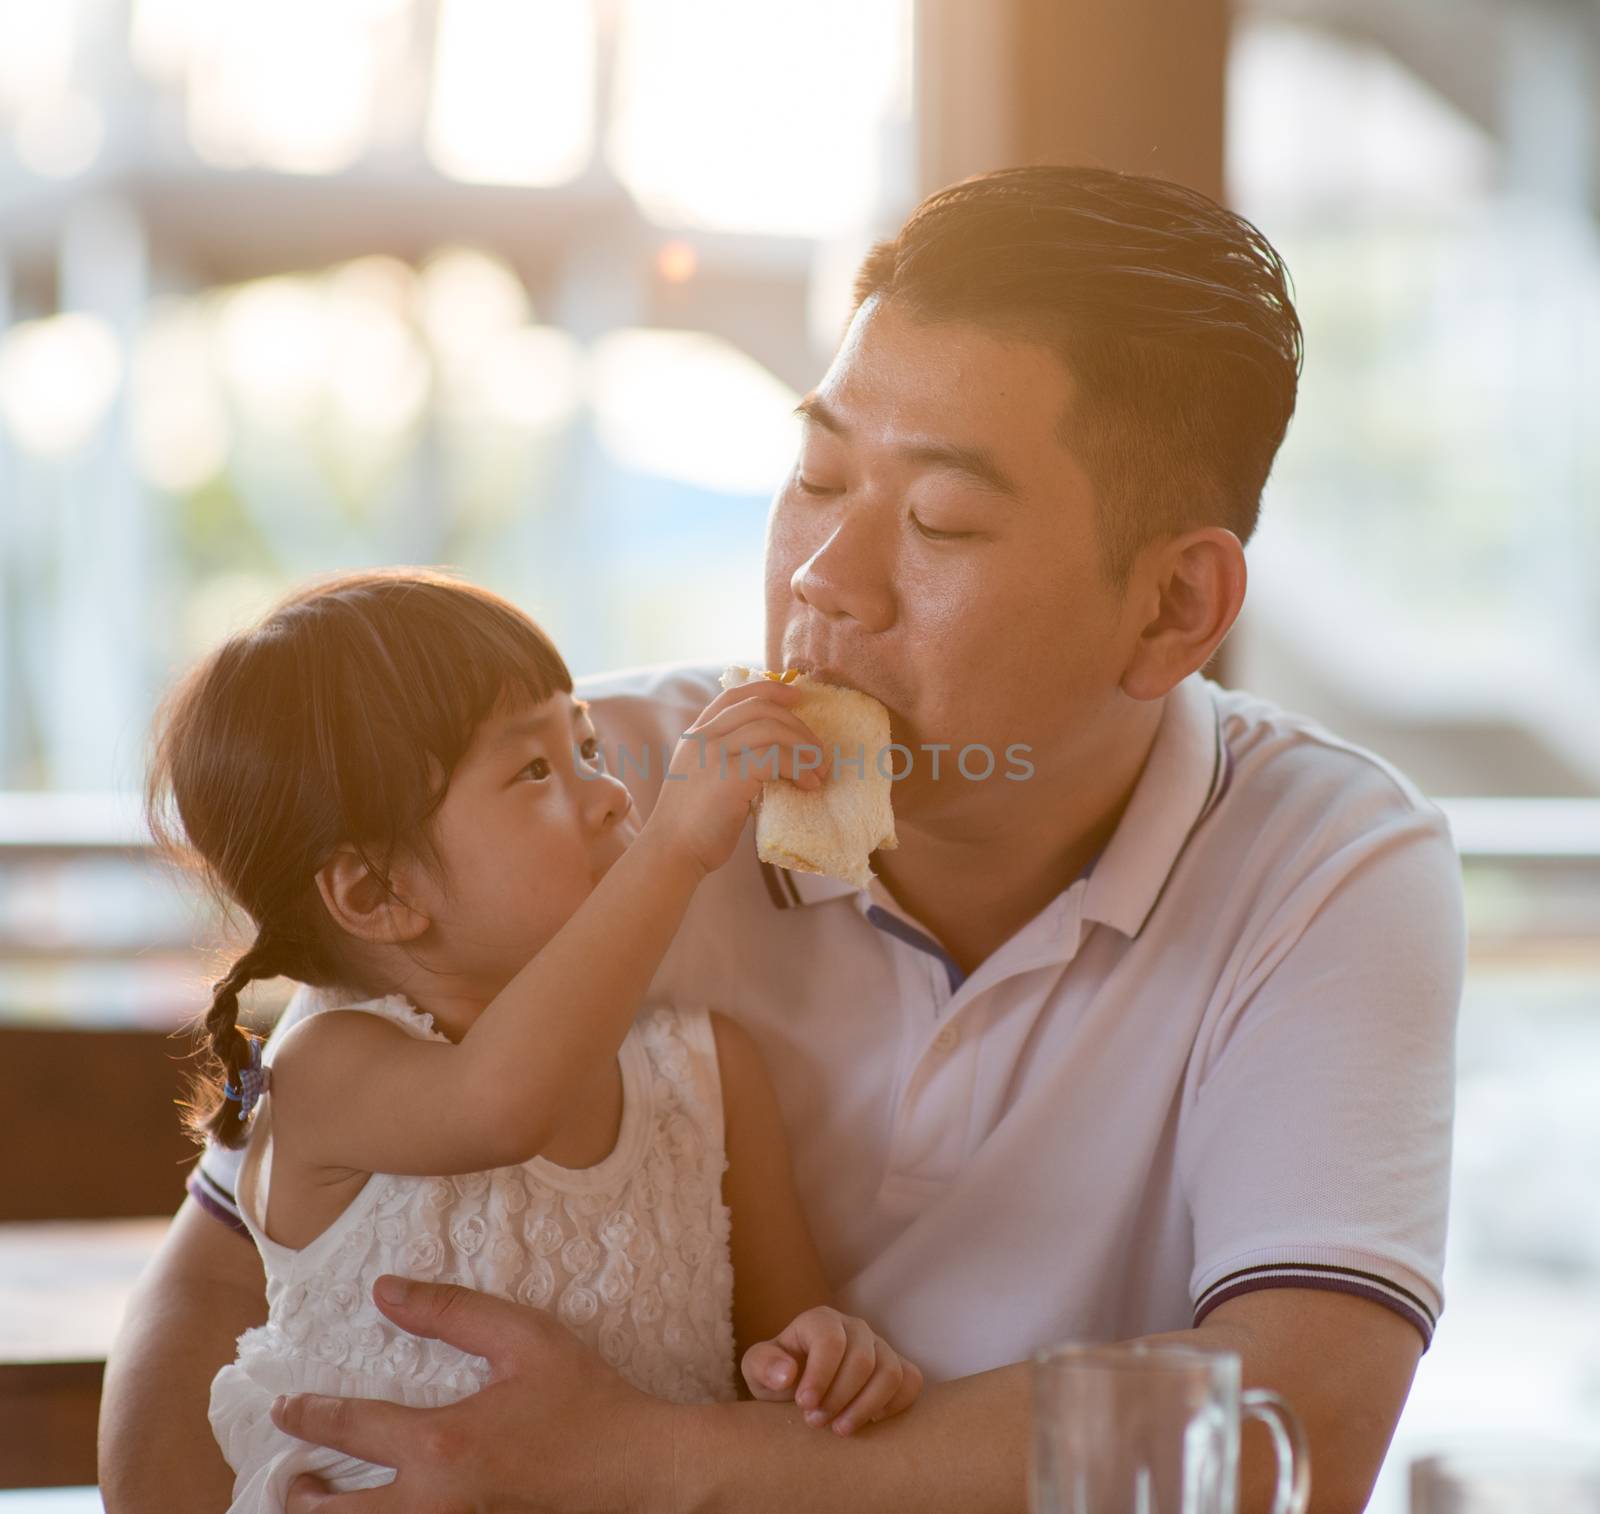 Child feeding bread to daddy at cafeteria. Asian family outdoor lifestyle with natural light.